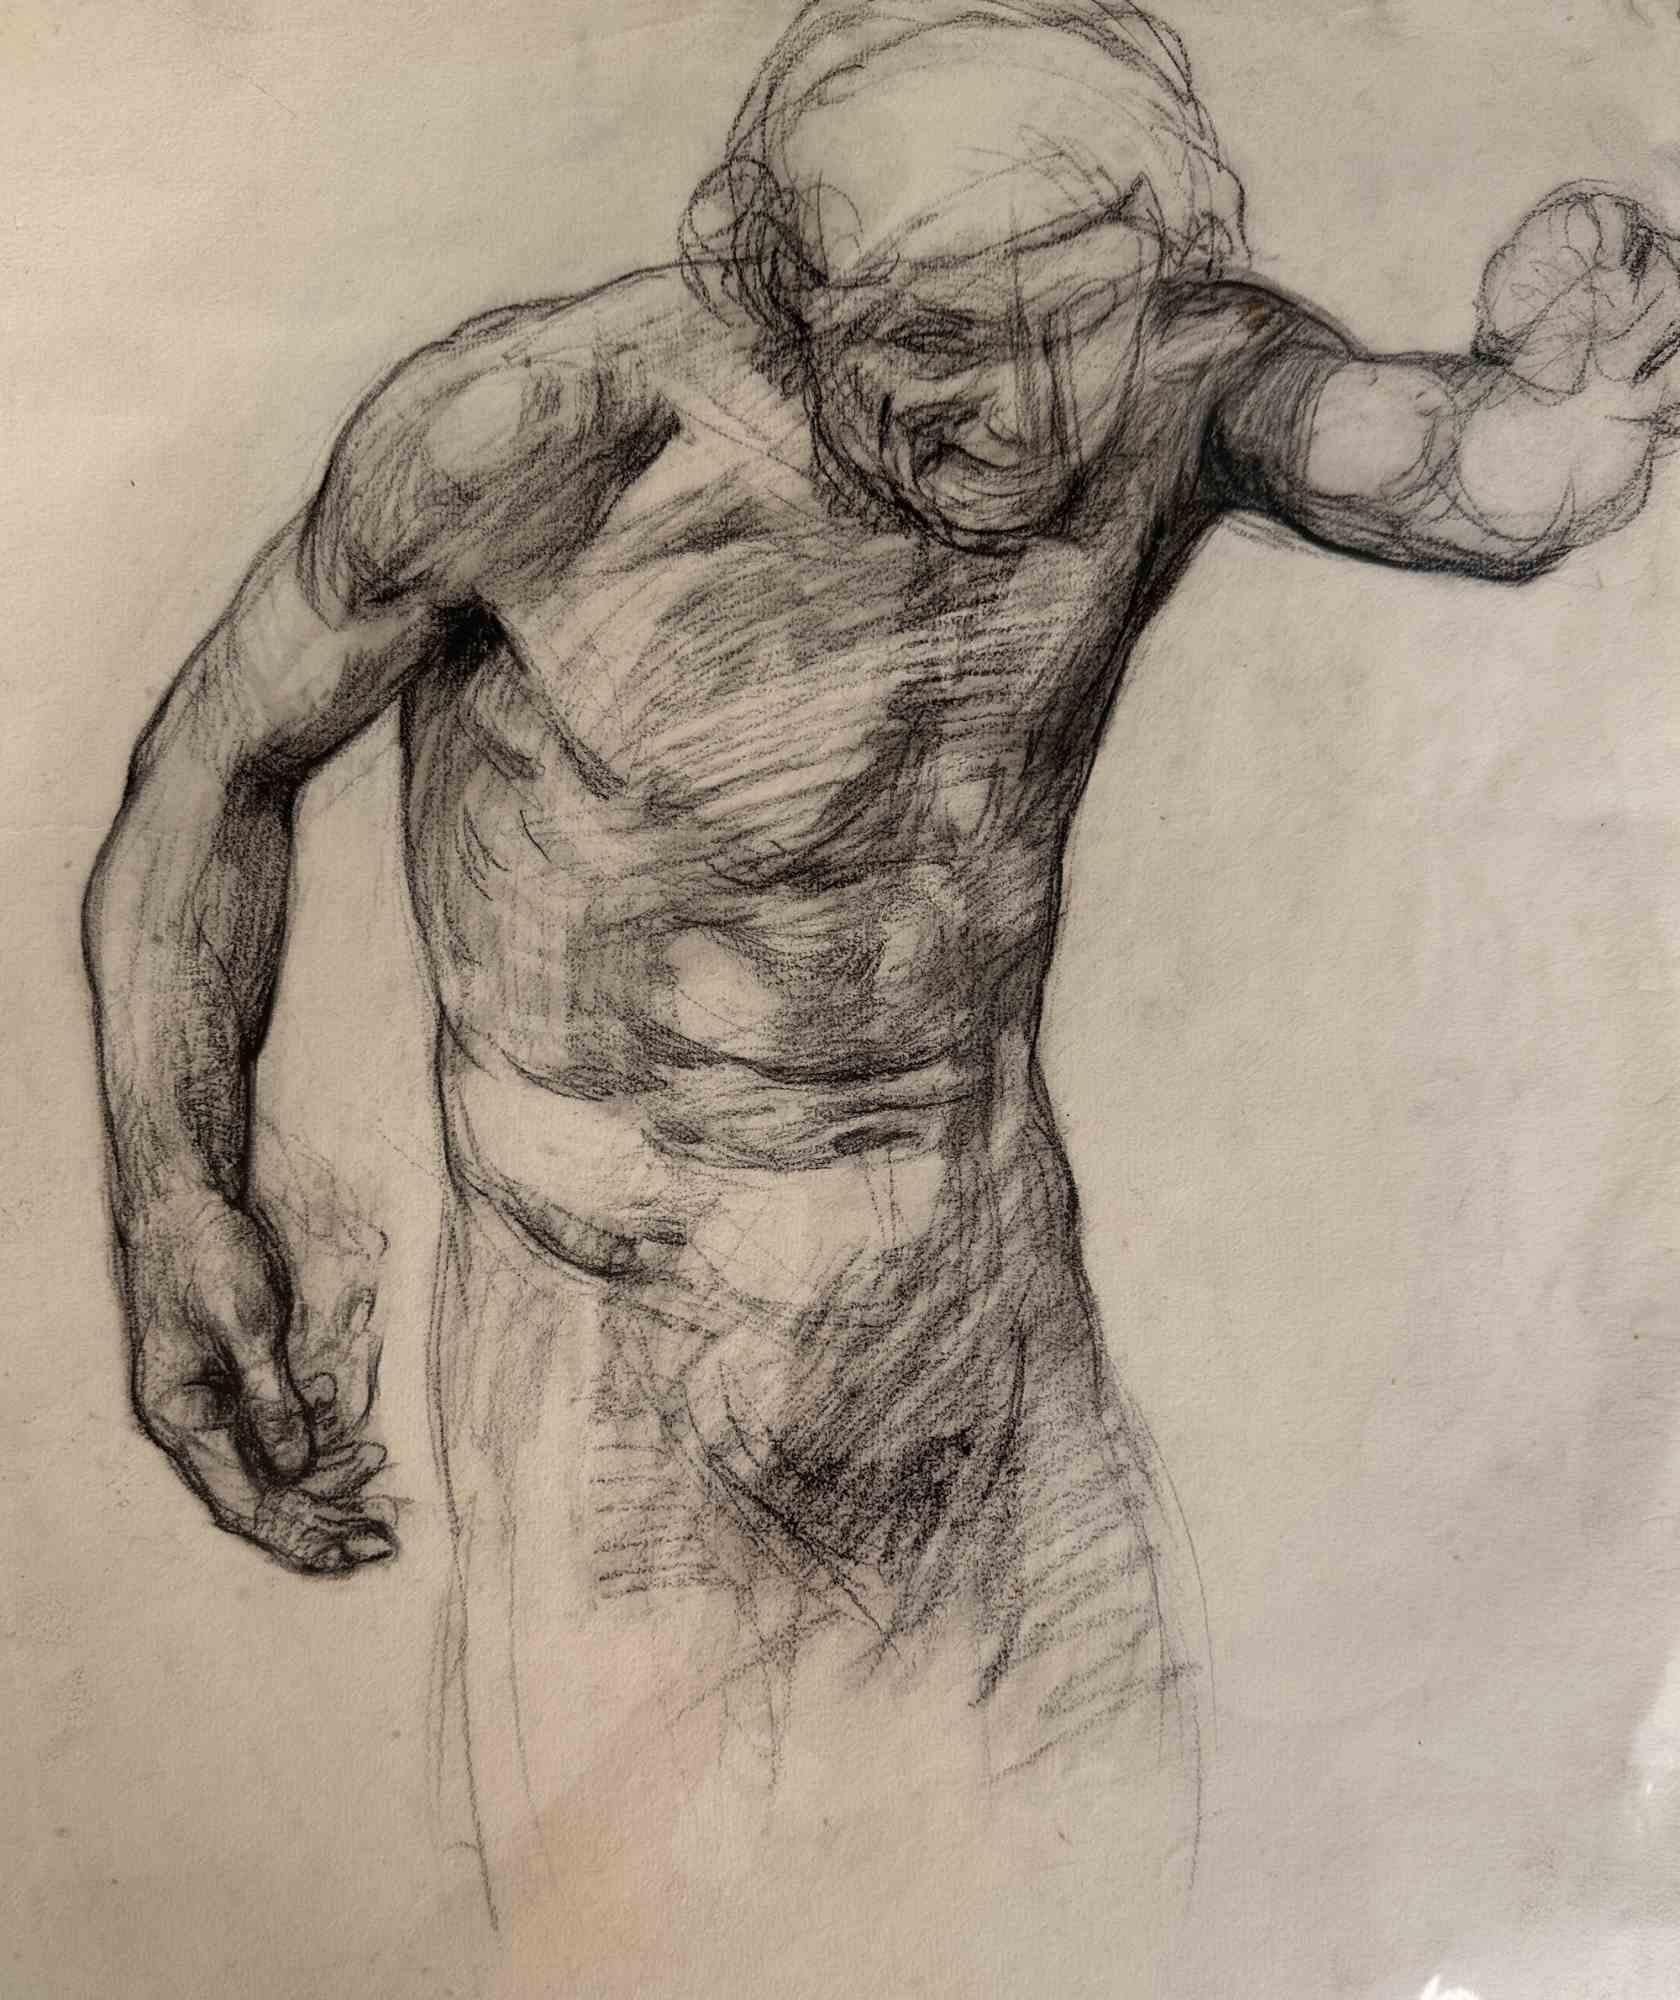 Unknown Figurative Art - Body of Man - Drawing - Mid-20th century